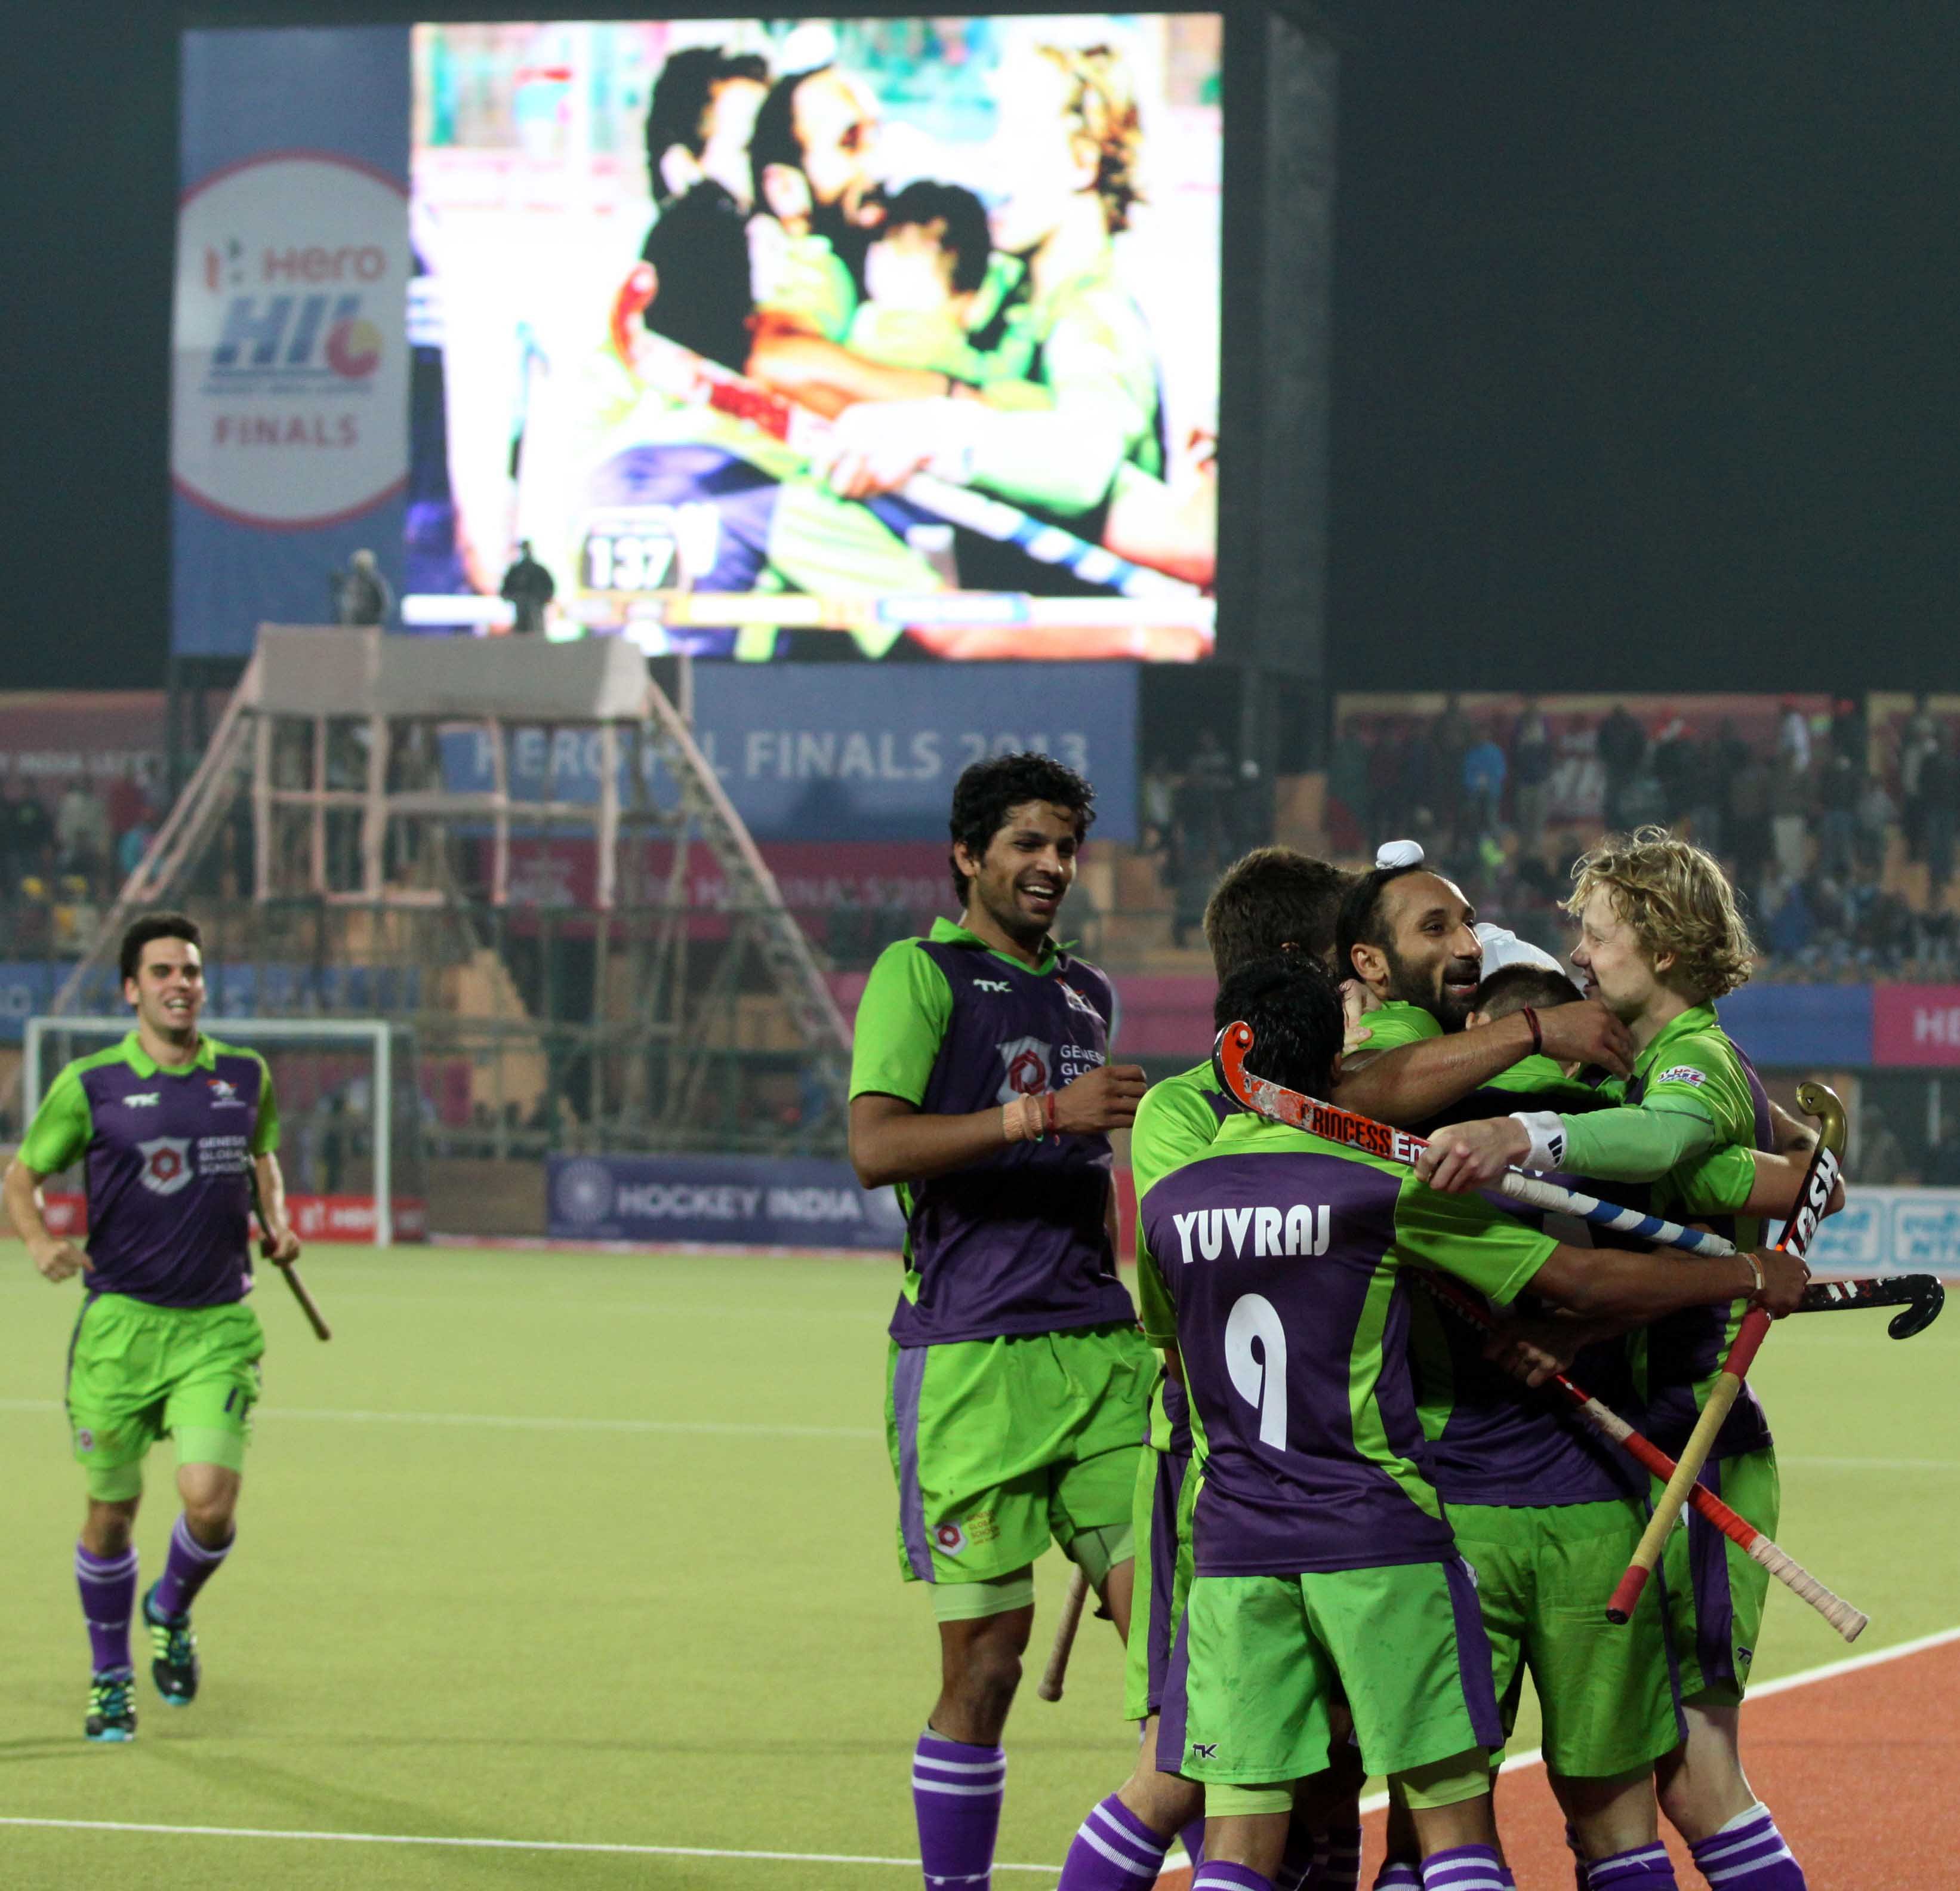 DWR team celebrating their third goal against JPW during the 2nd semi finals at Ranchi on 9th Feb 2013 - Copy